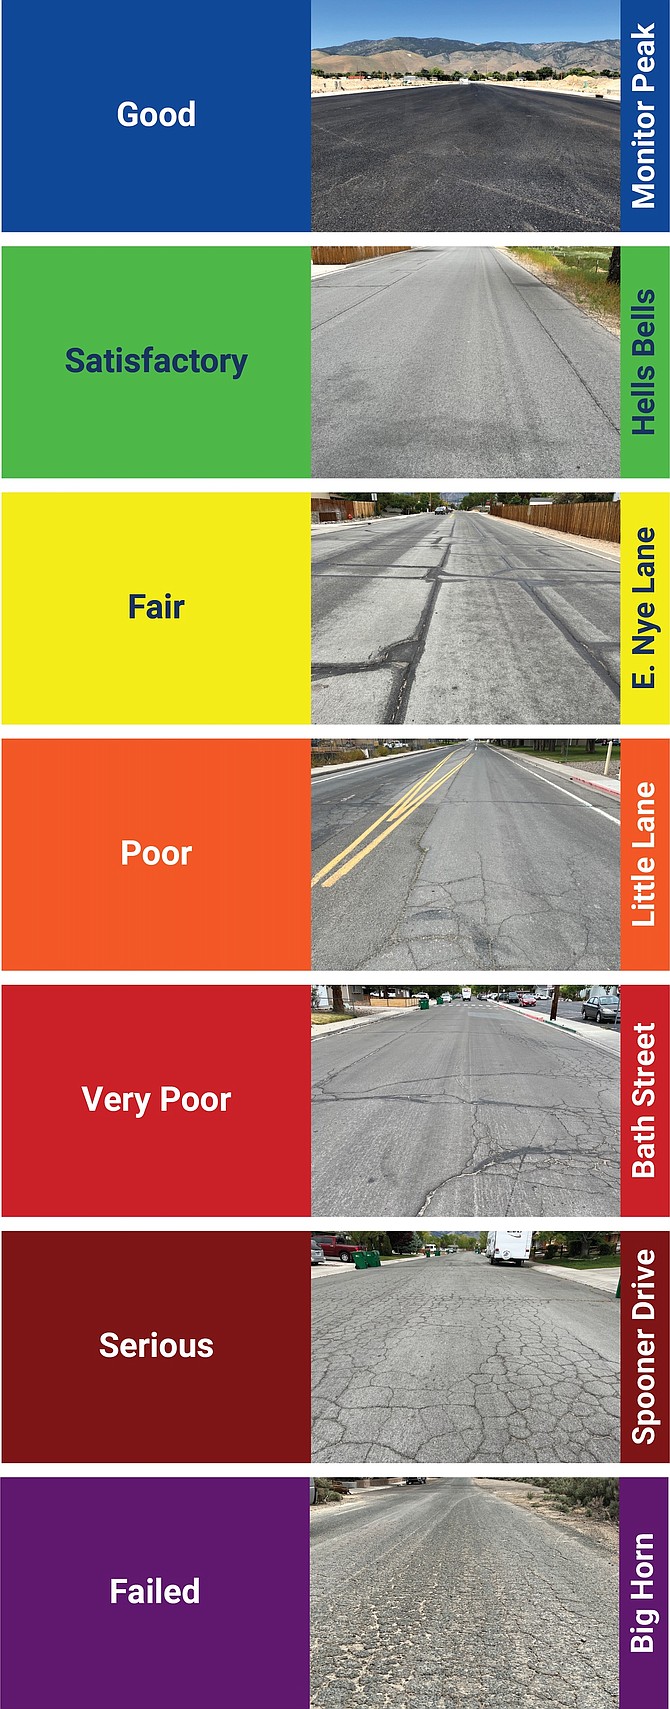 A graphic on www.preservecarsoncityroads.com shows local pavement conditions from good to failed.